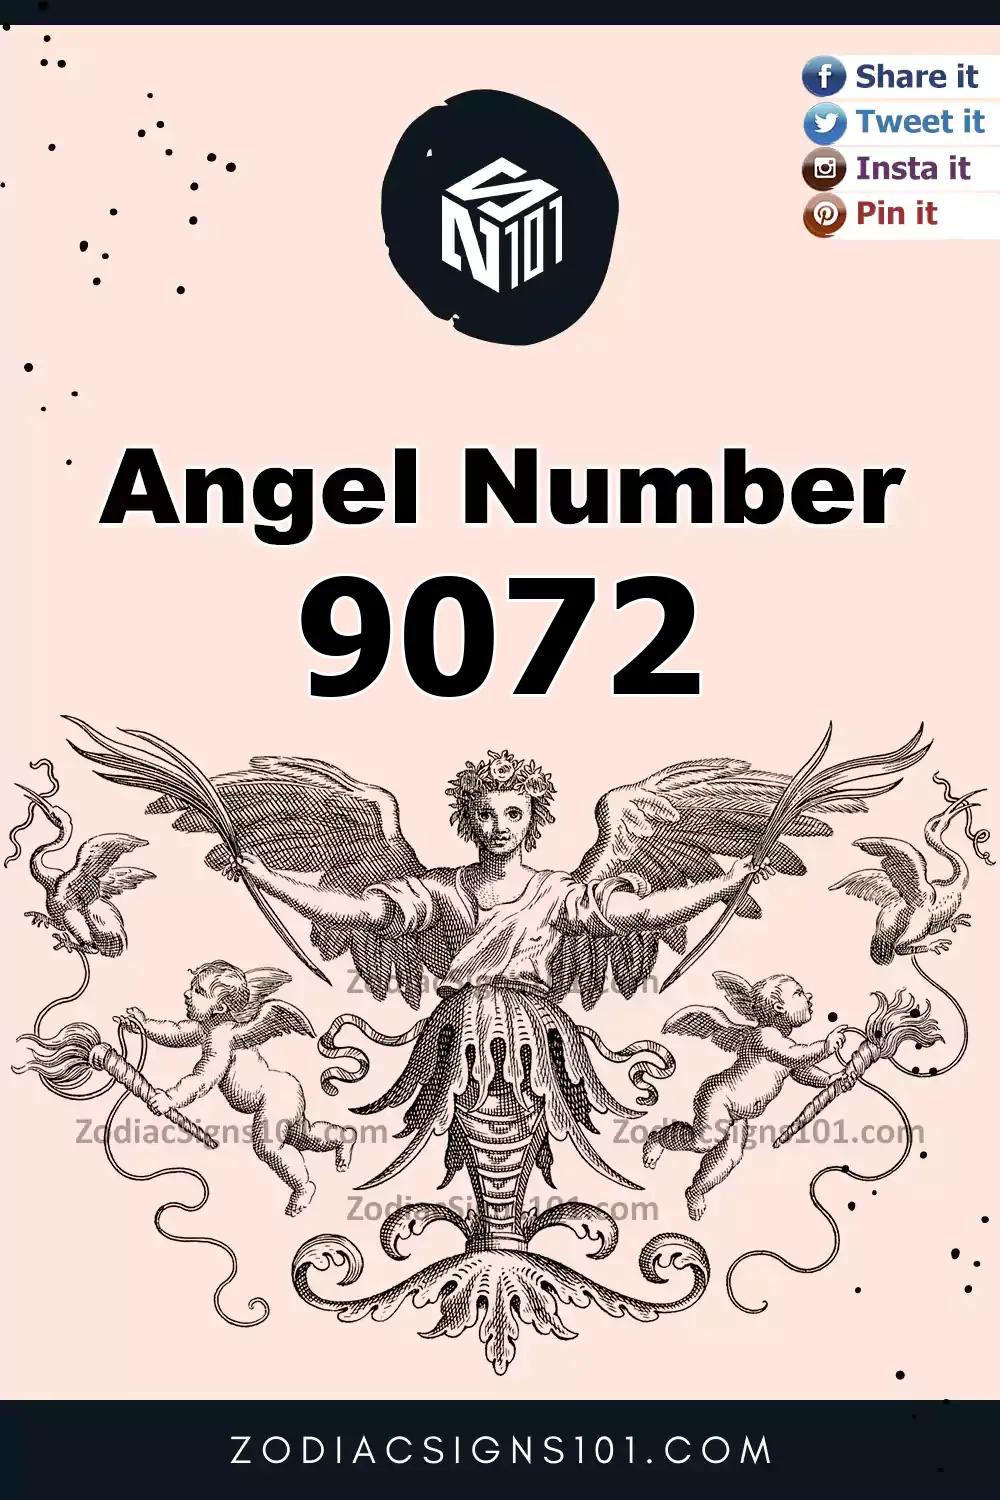 9072 Angel Number Meaning